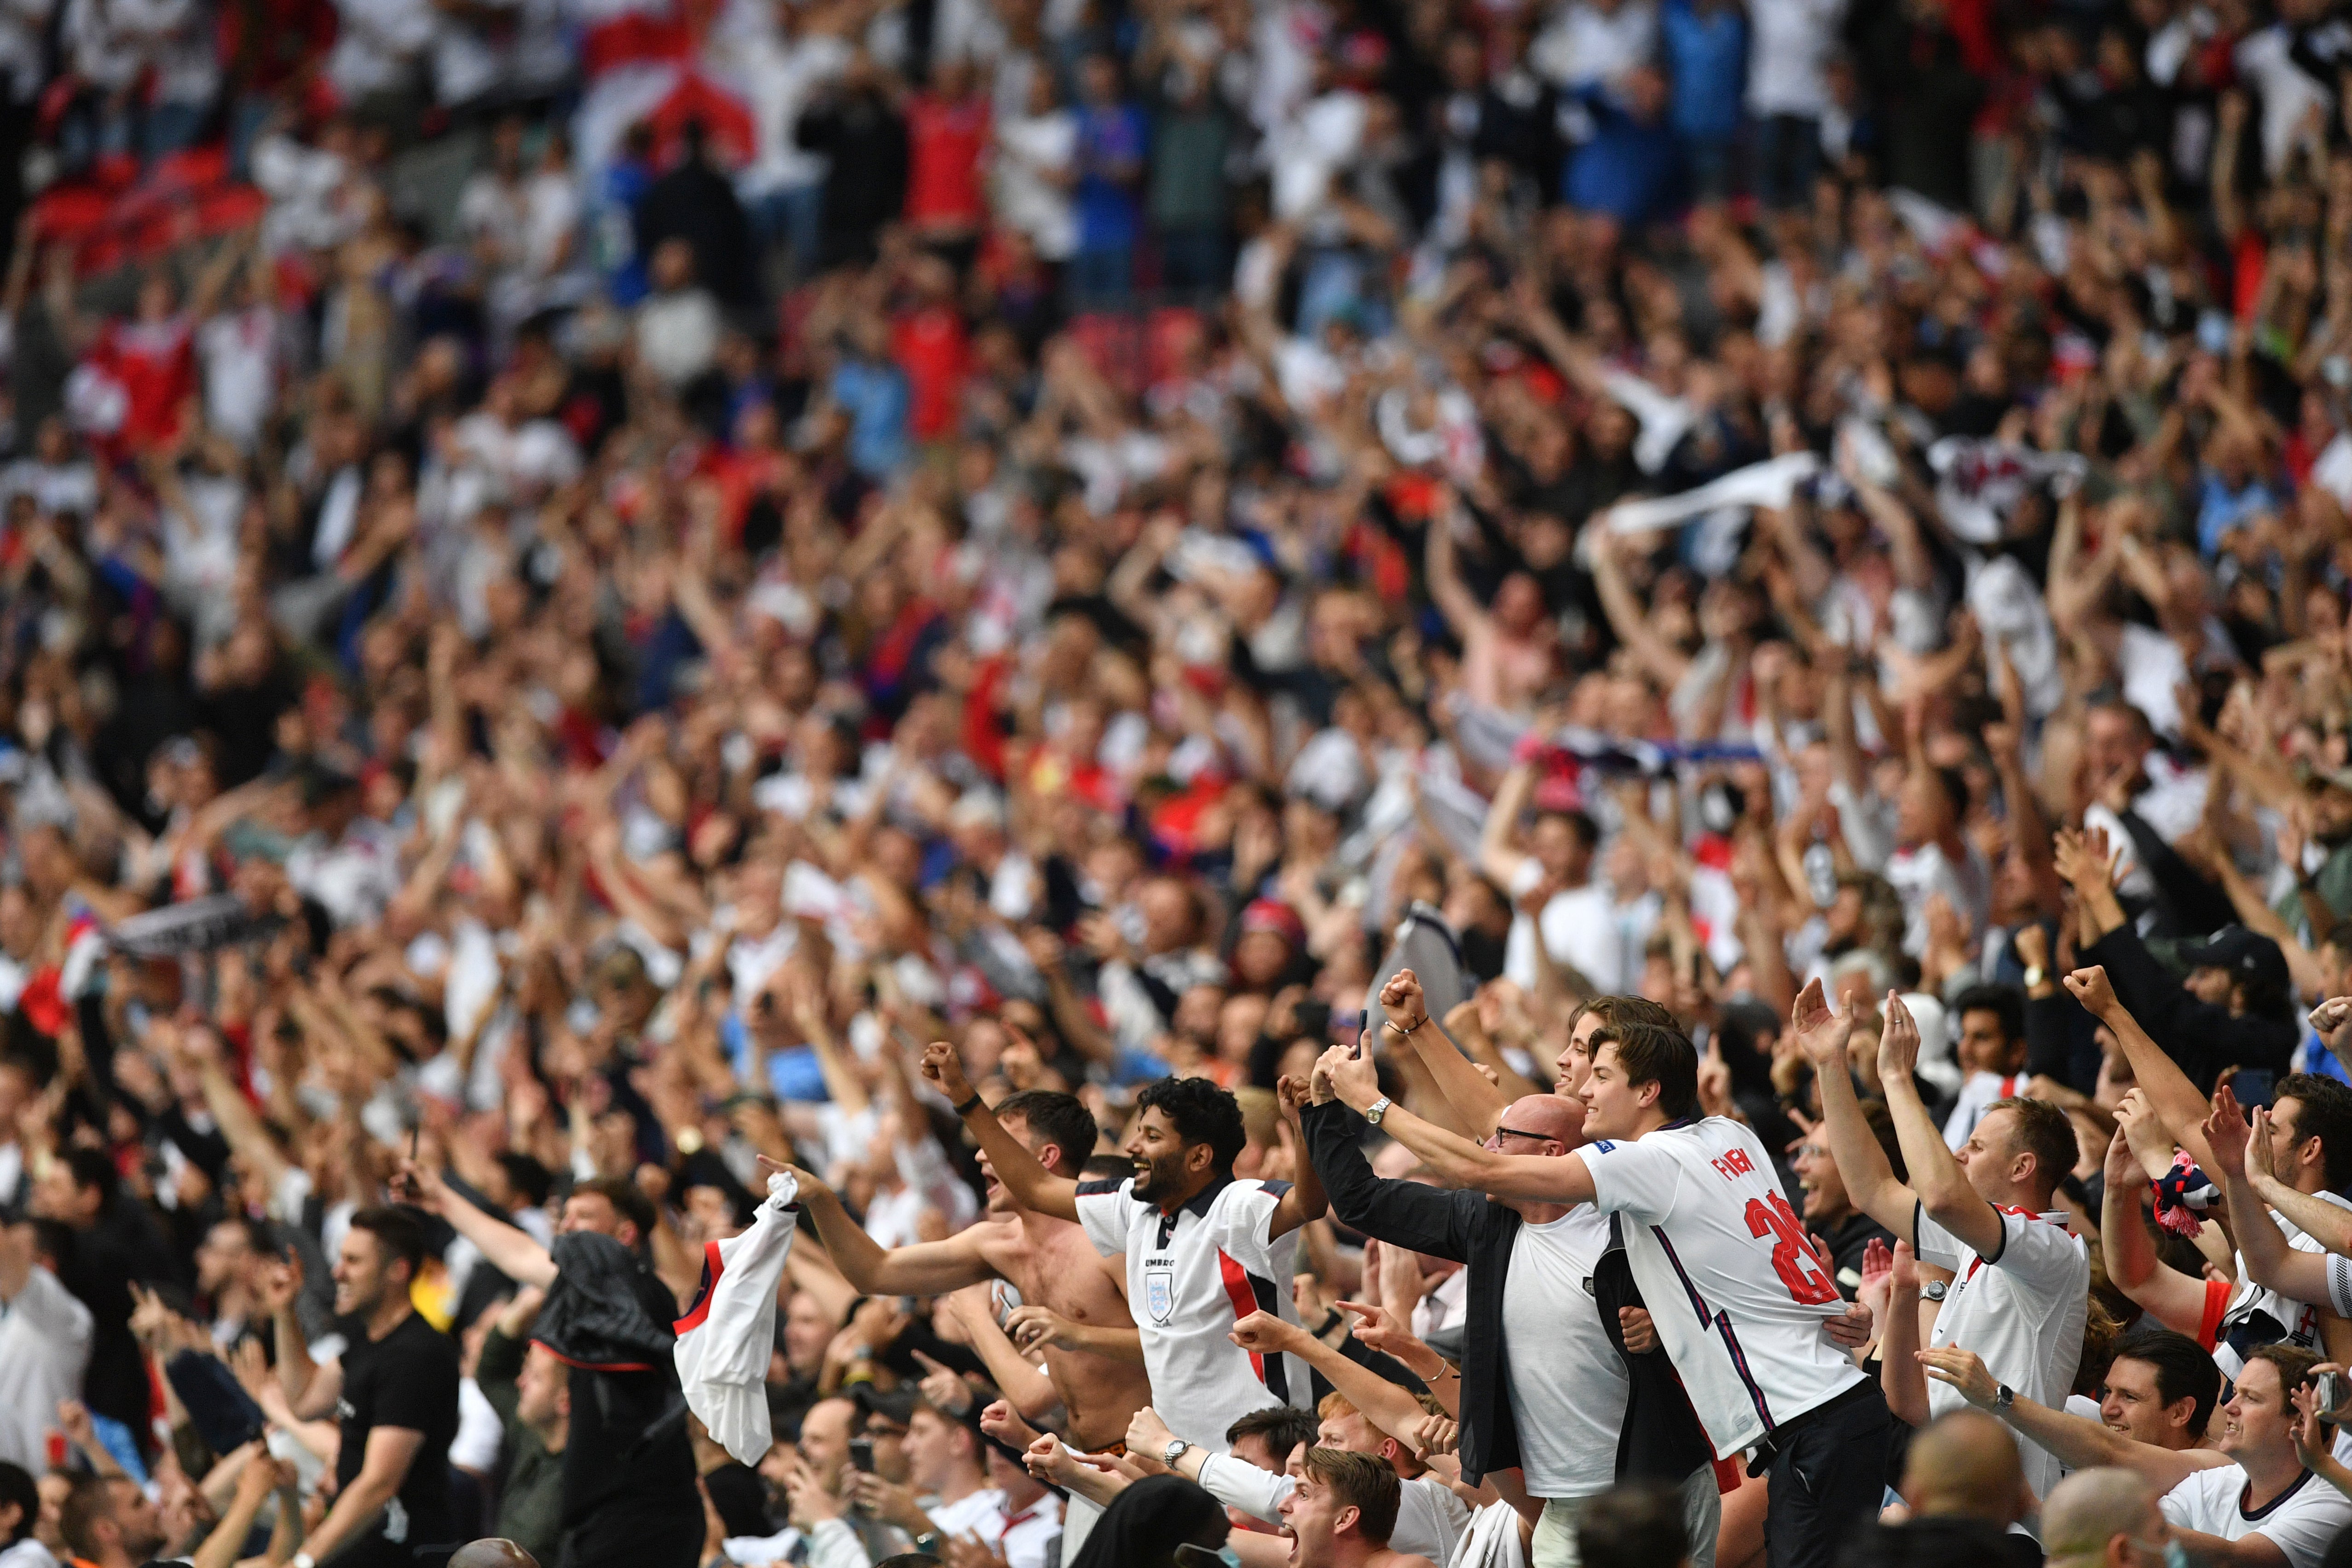 Euro 2020 semi-final capacity How many fans are at Wembley tonight? The Independent